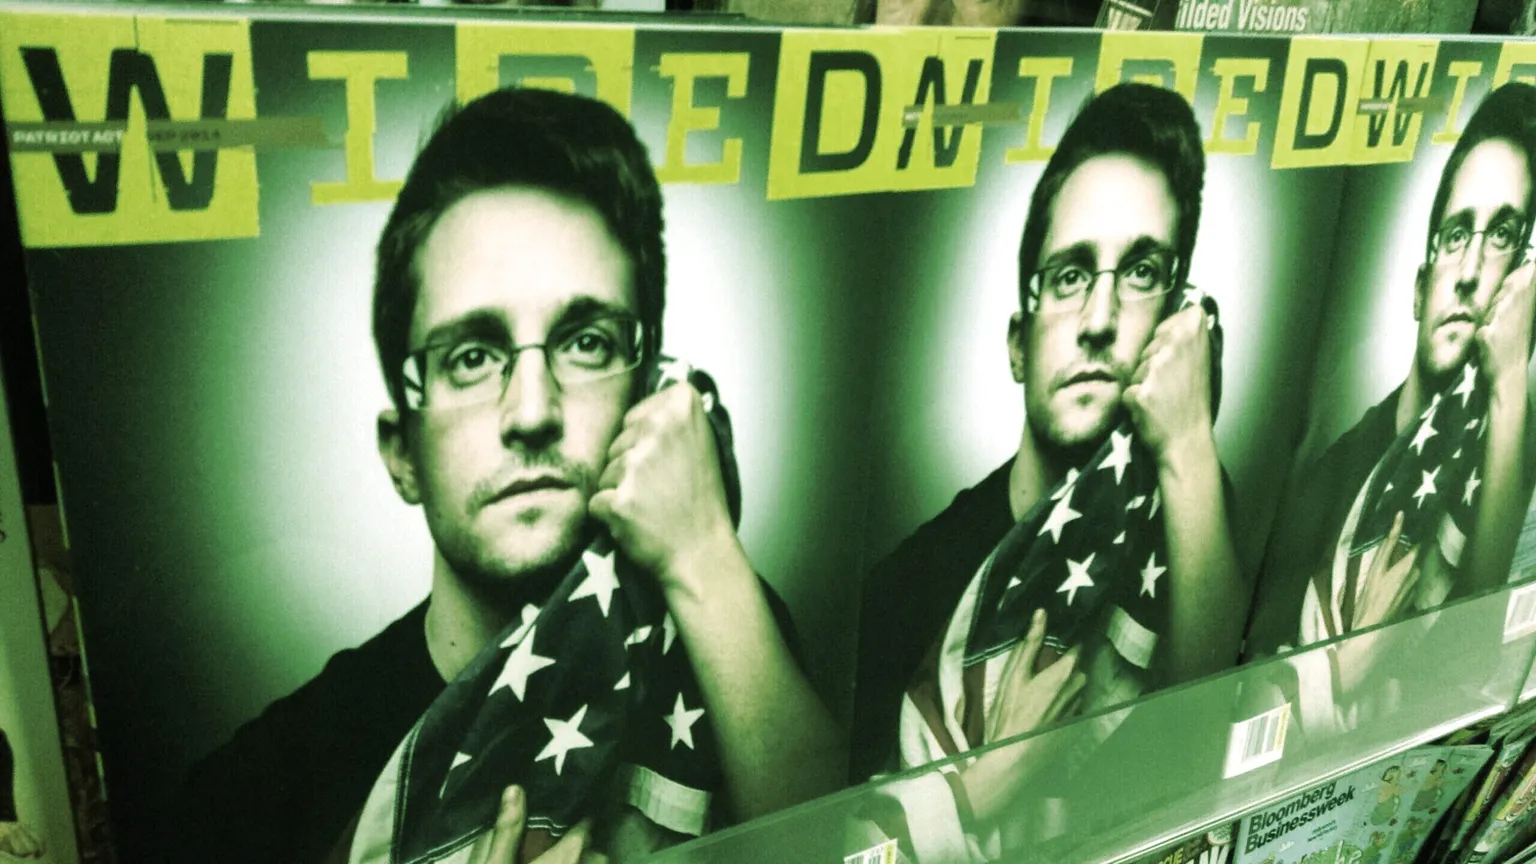 Edward Snowden on the cover of Wired. Image:(CC BY 2.0) Mike Mozart